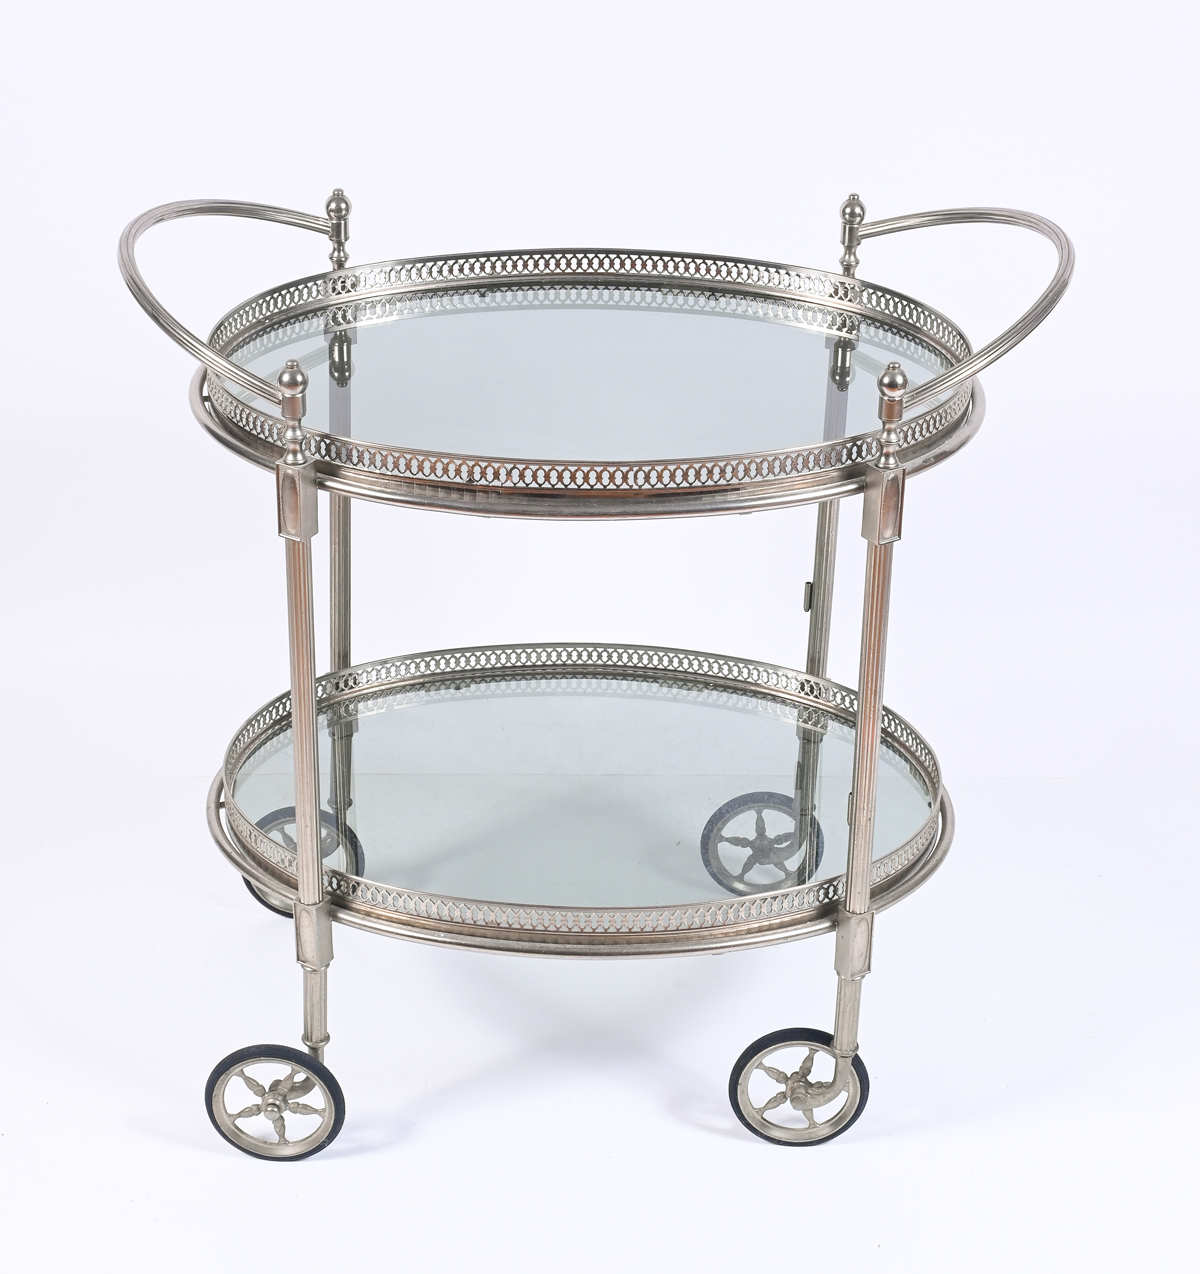 FRENCH MID-CENTURY TEA CART: Two-tiered